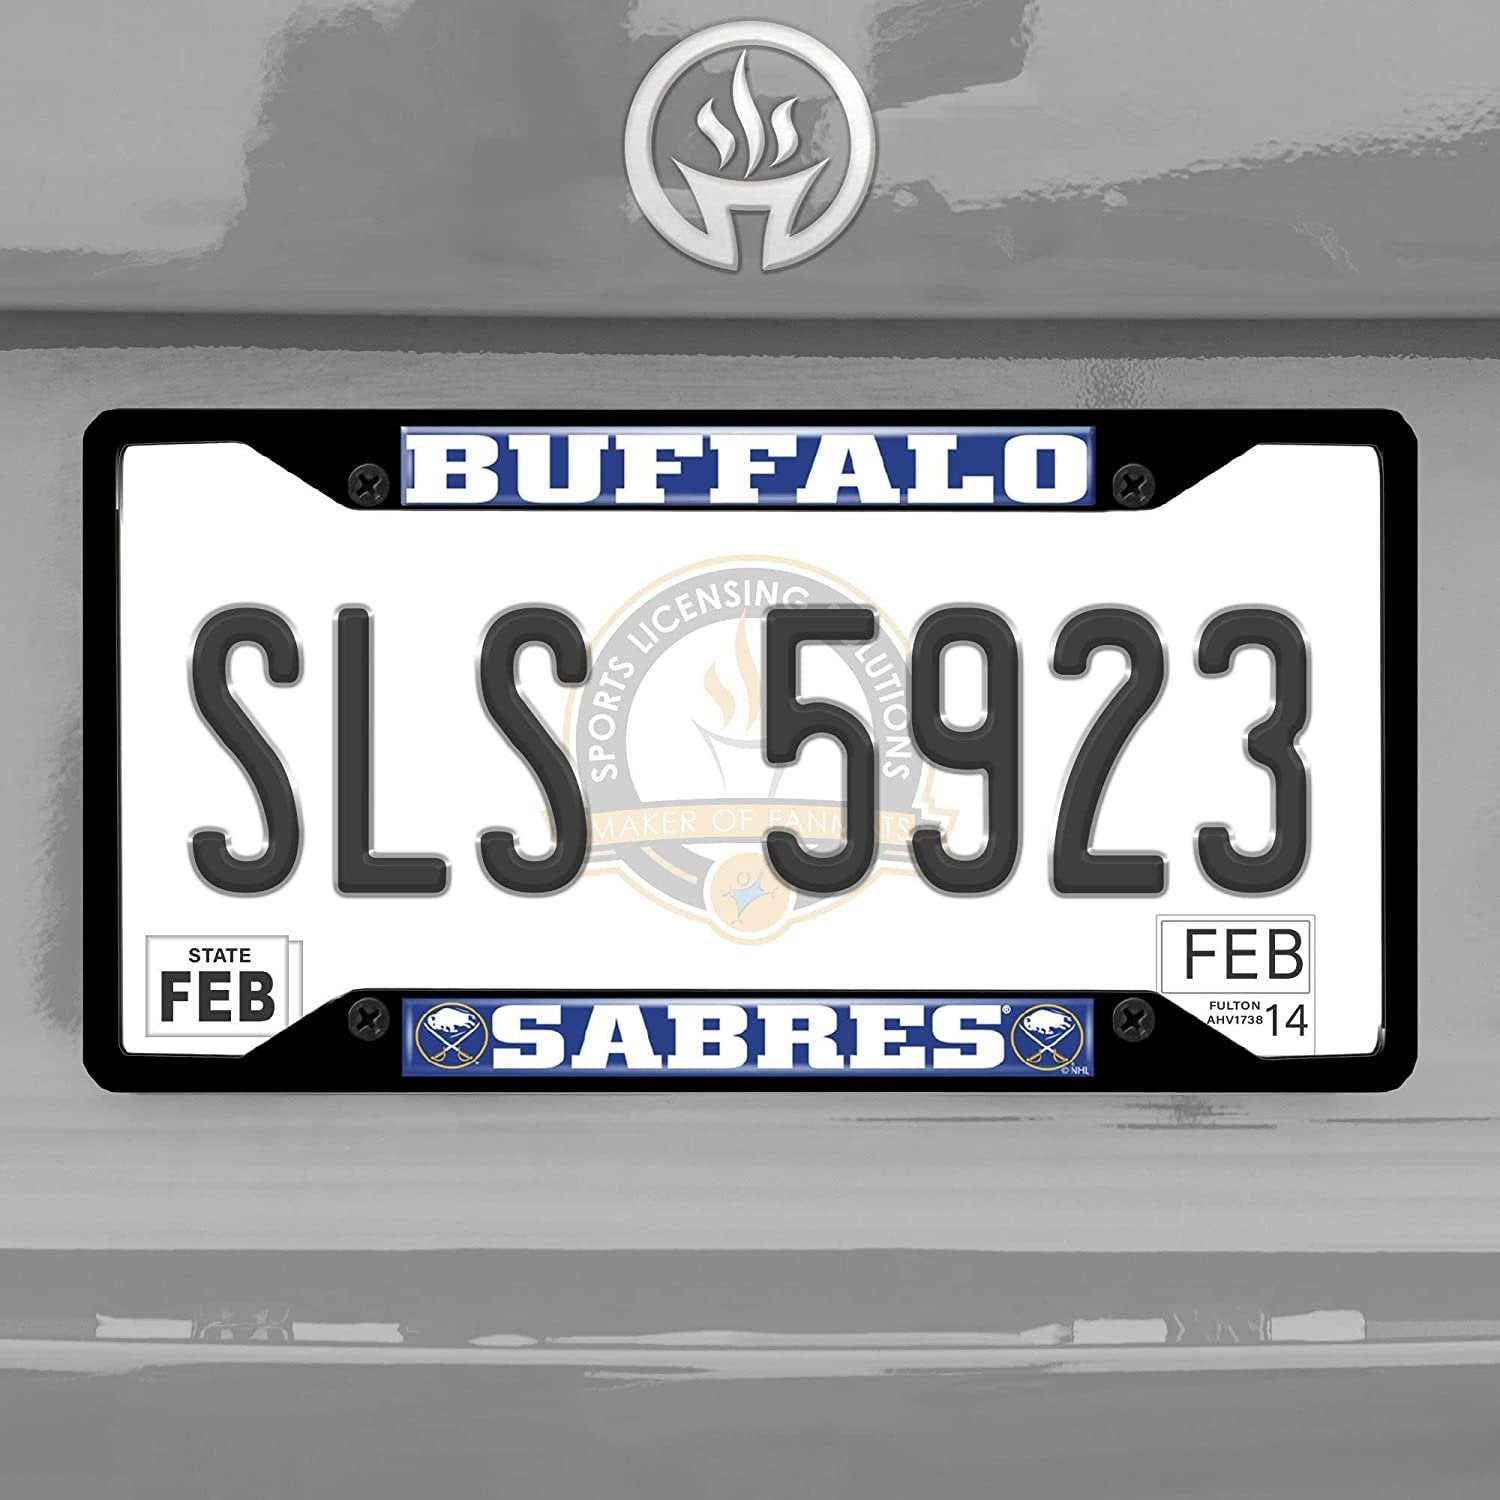 Buffalo Sabres Black Metal License Plate Frame Tag Cover, 6x12 Inch